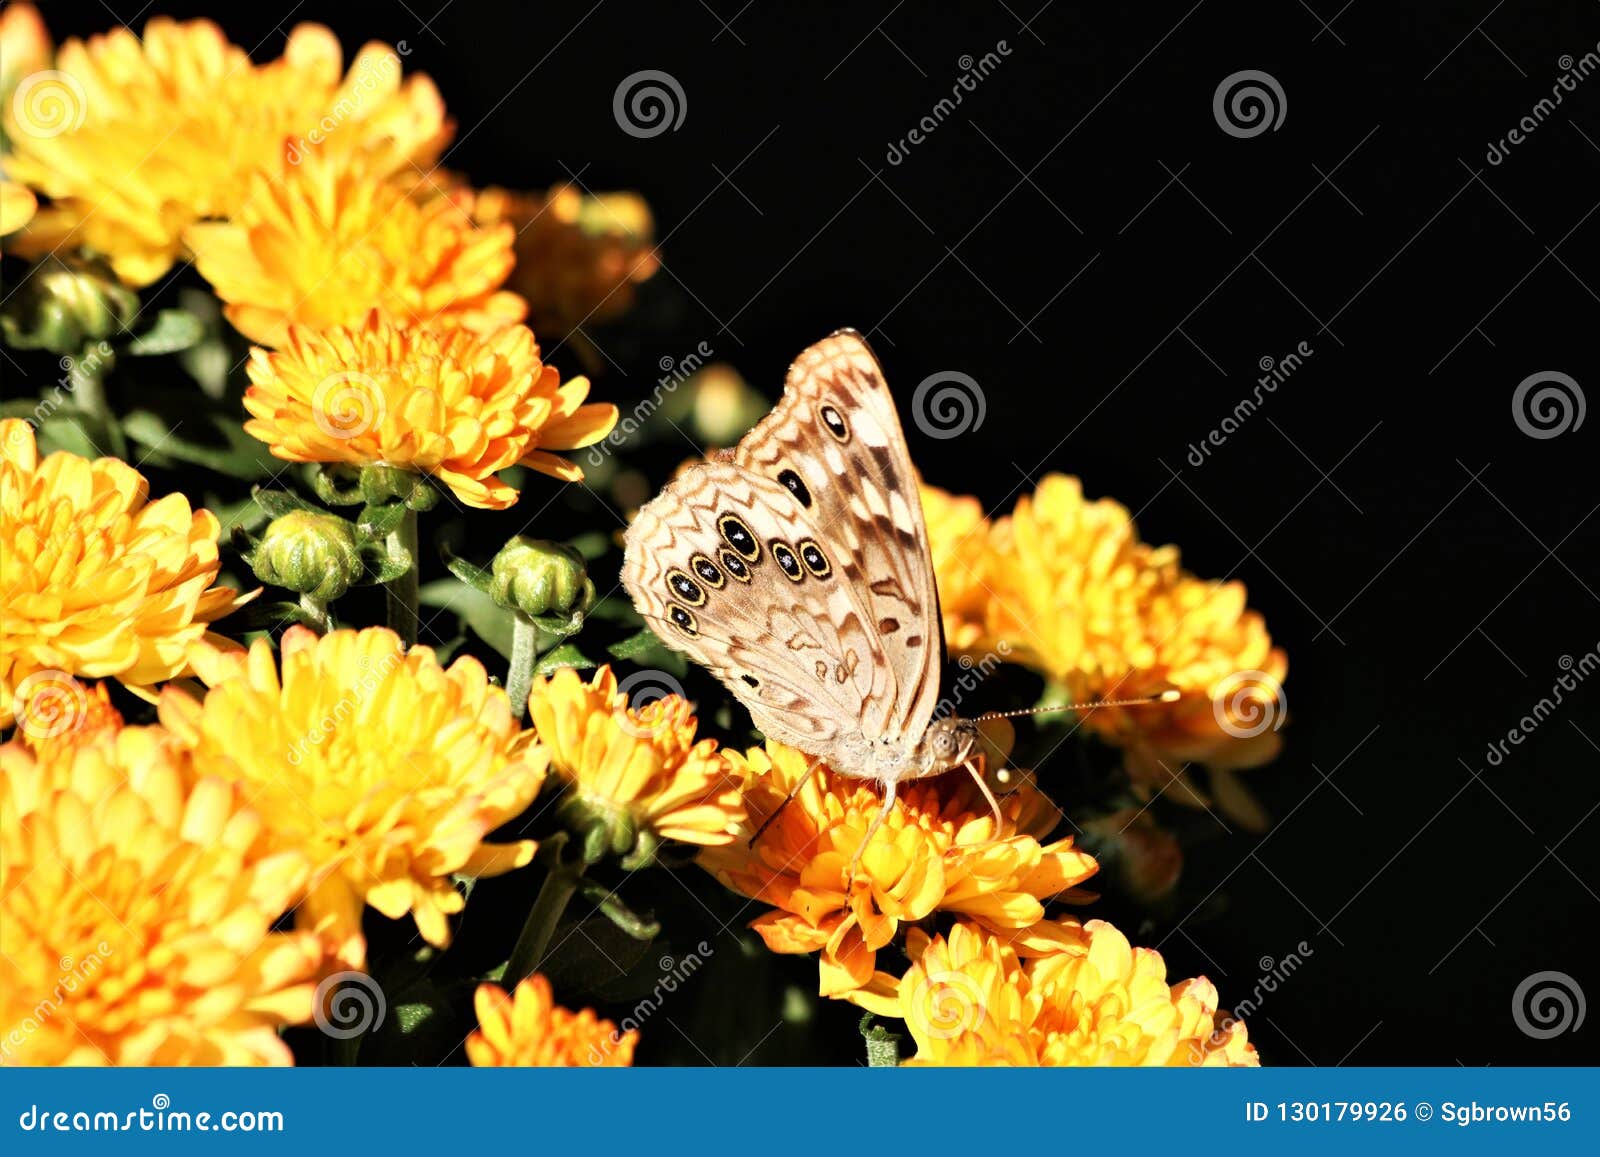 hackberry emperor butterfly on yellow chrysanthemums